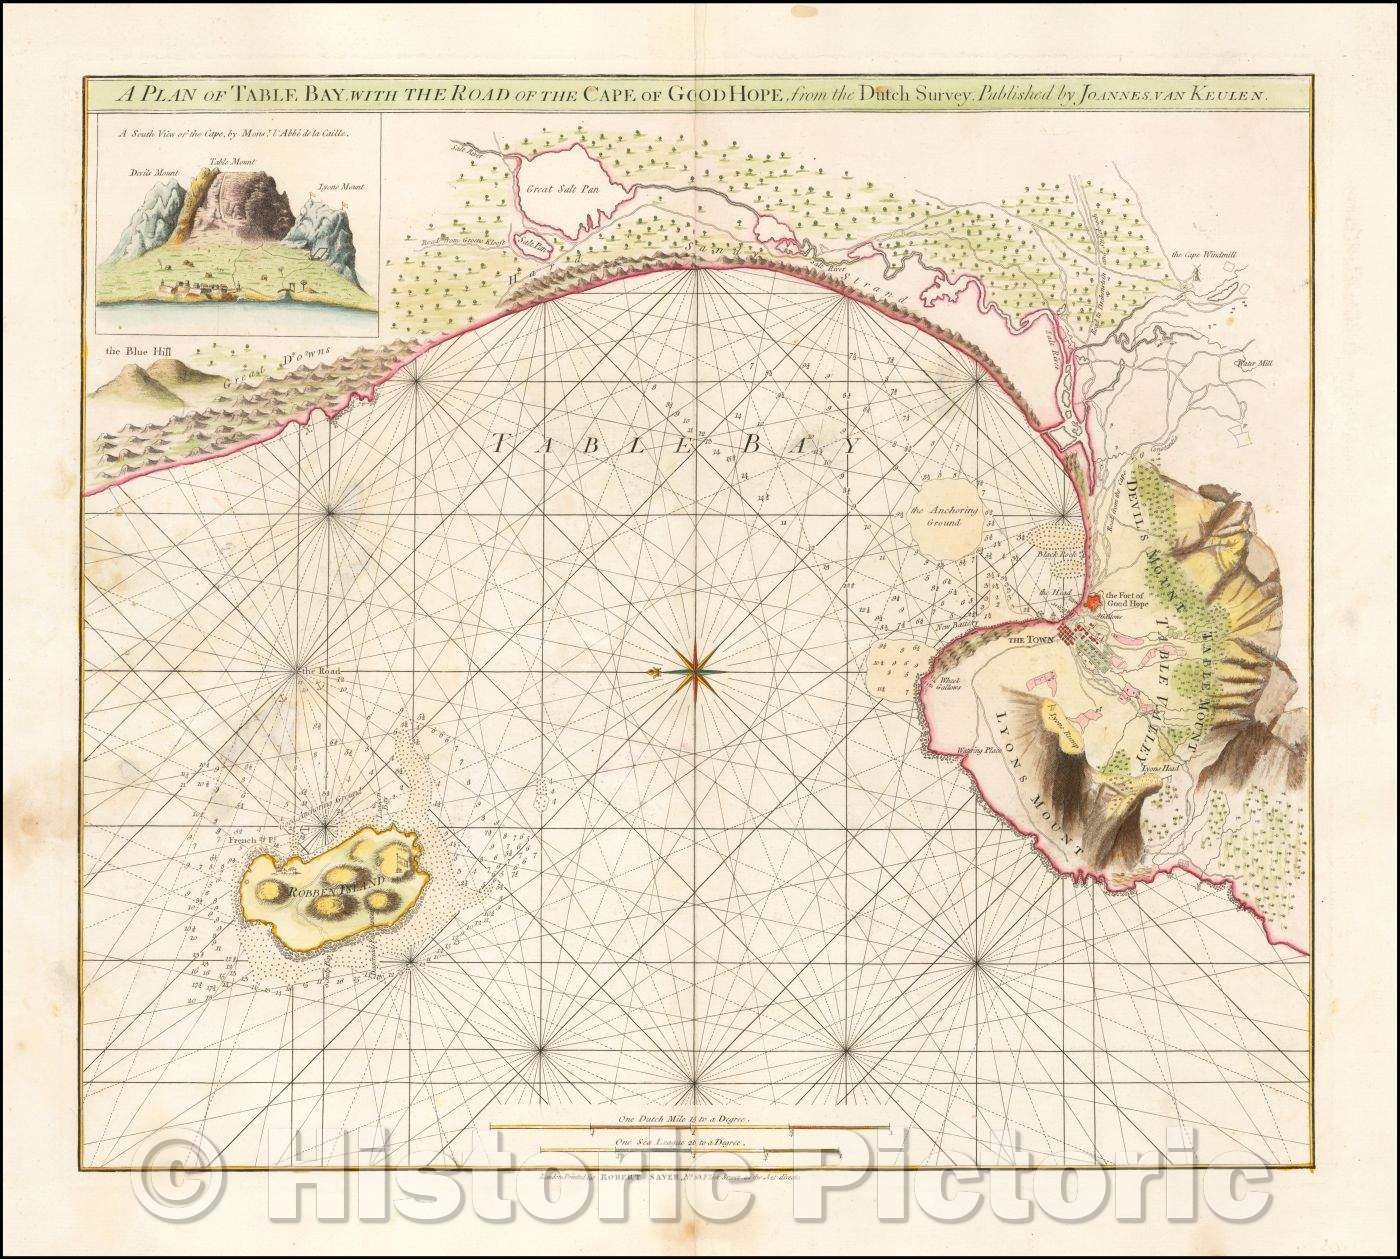 Historic Map - A Plan of Table Bay, with the Road of the Cape of Good Hope, from the Dutch Survey, 1770, Robert Sayer - Vintage Wall Art